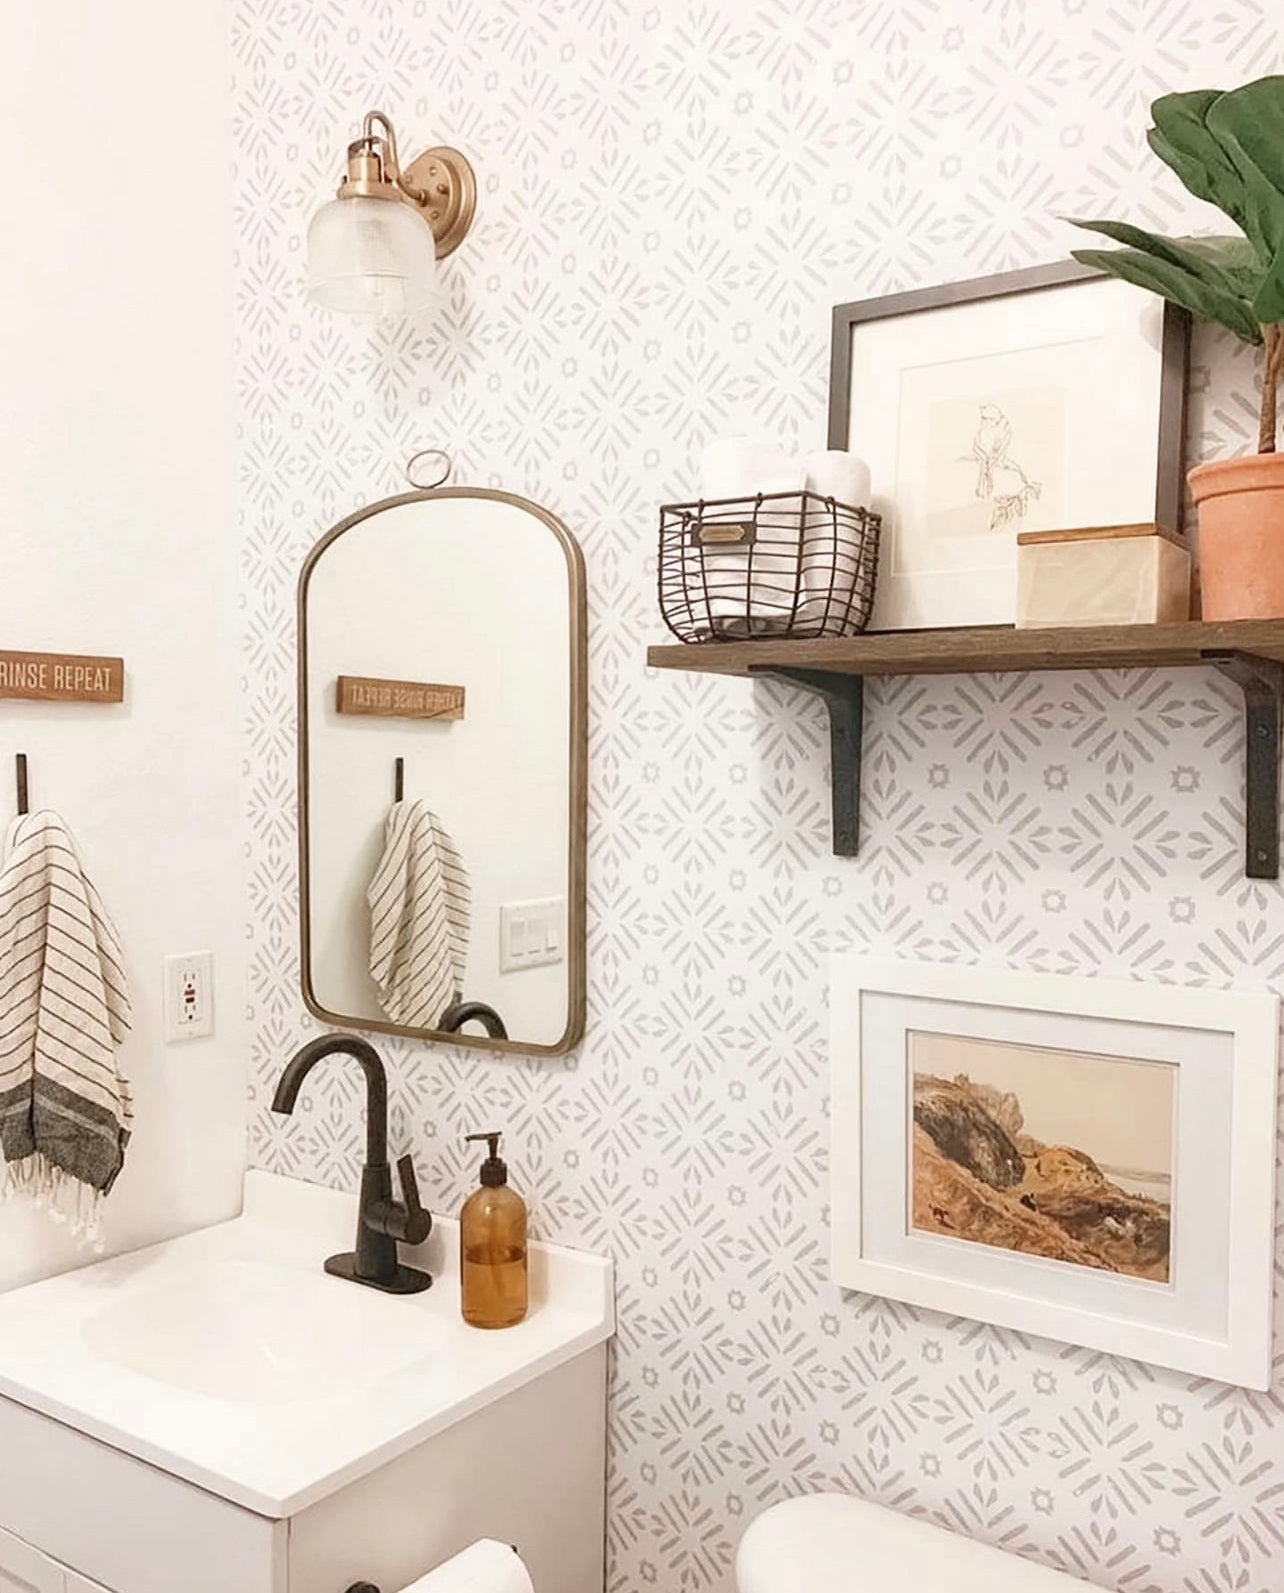 A stylish bathroom interior displaying Geometric Wallpaper III with a subtle gray and white star pattern, complemented by a vintage brass light fixture, a curved mirror, and wooden shelving with framed art and potted plants for a cozy, contemporary look.